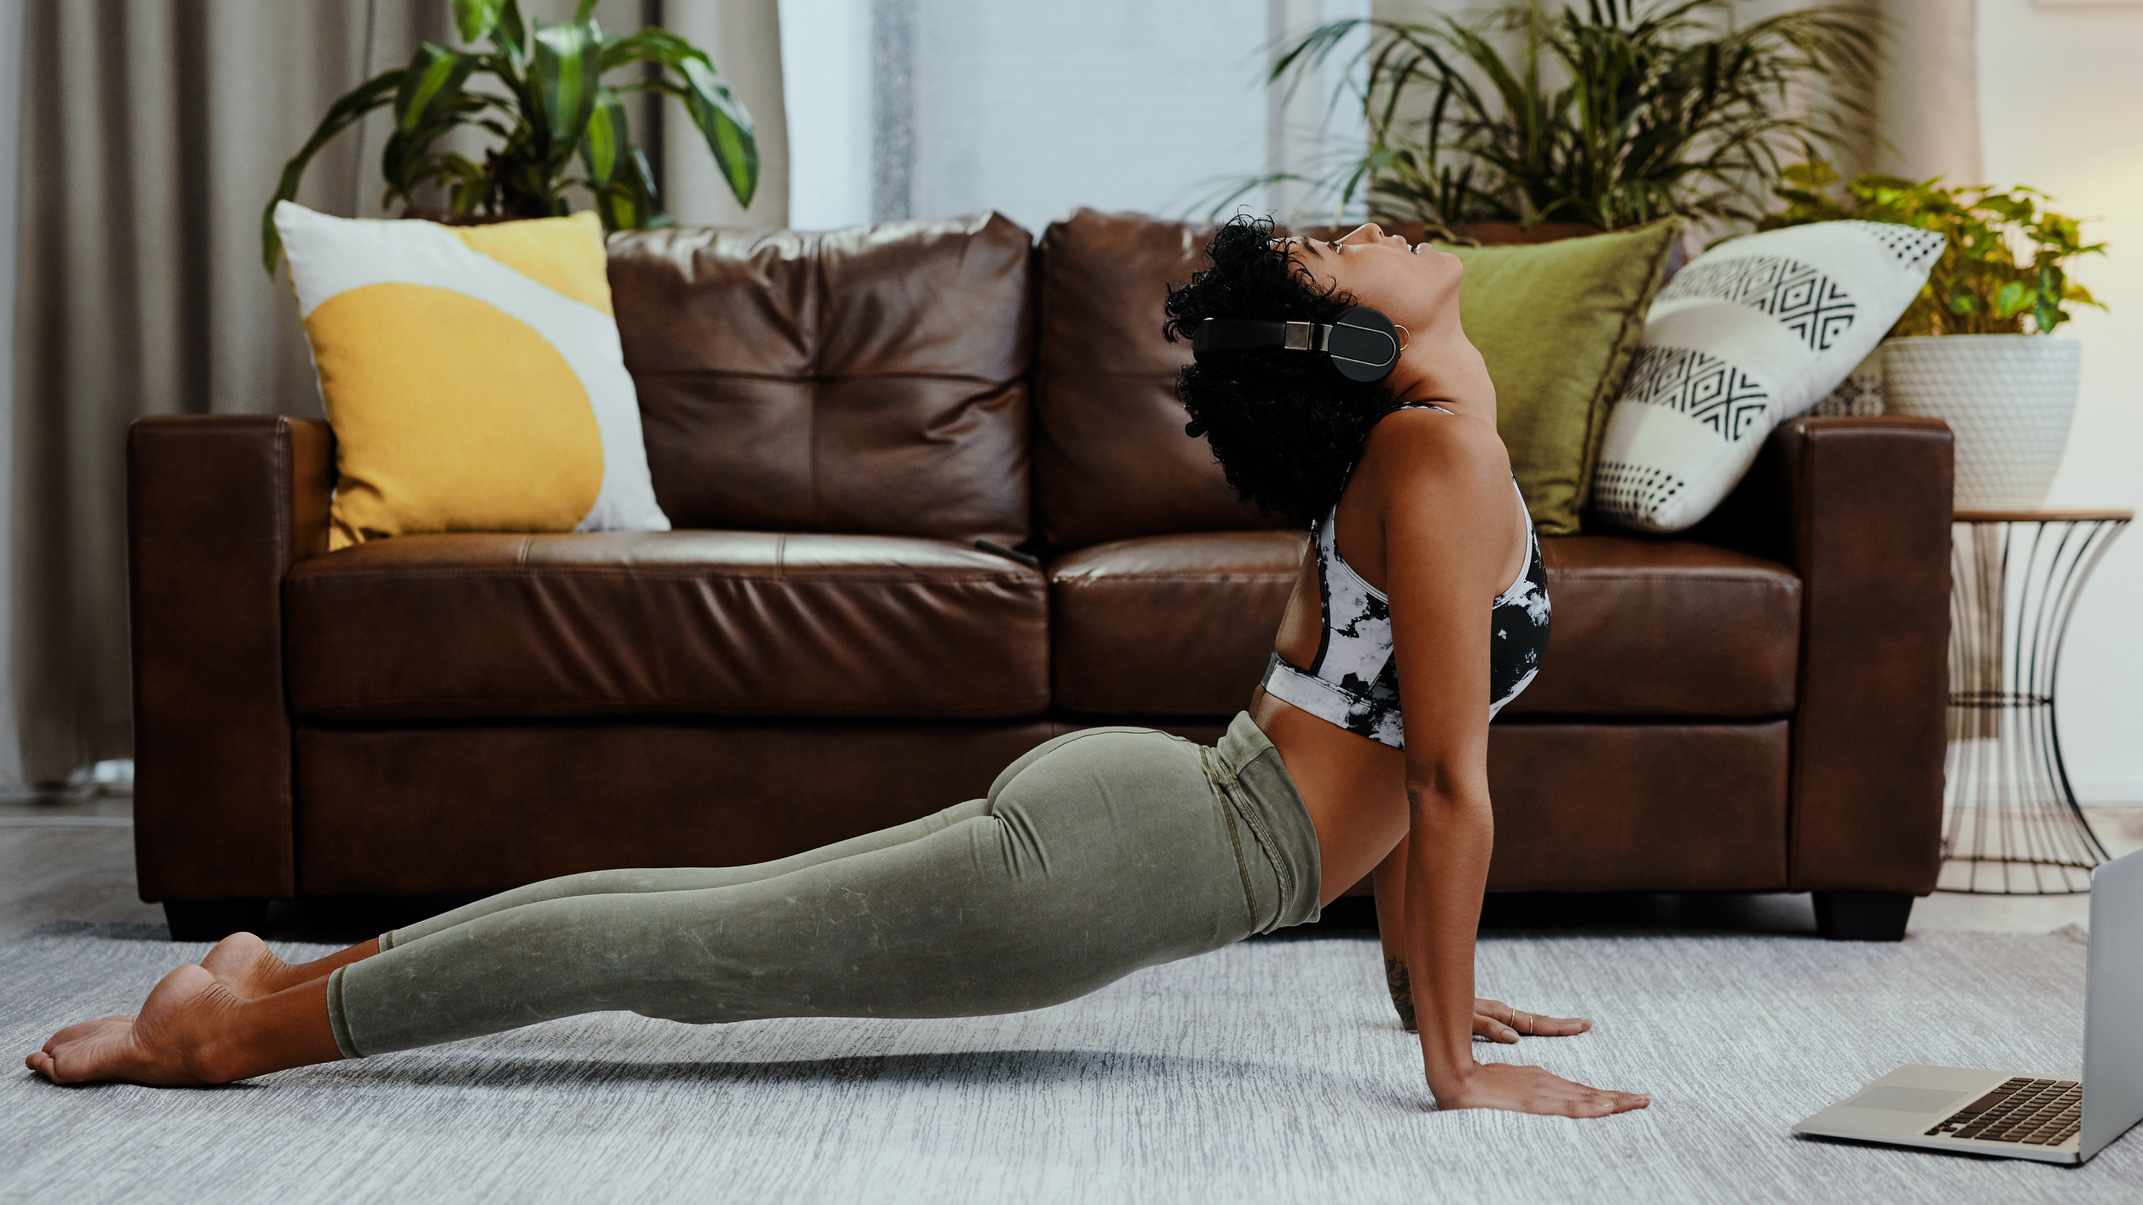 10-Minute Yoga to Sculpt and Tone Your Core - Prime Women Media